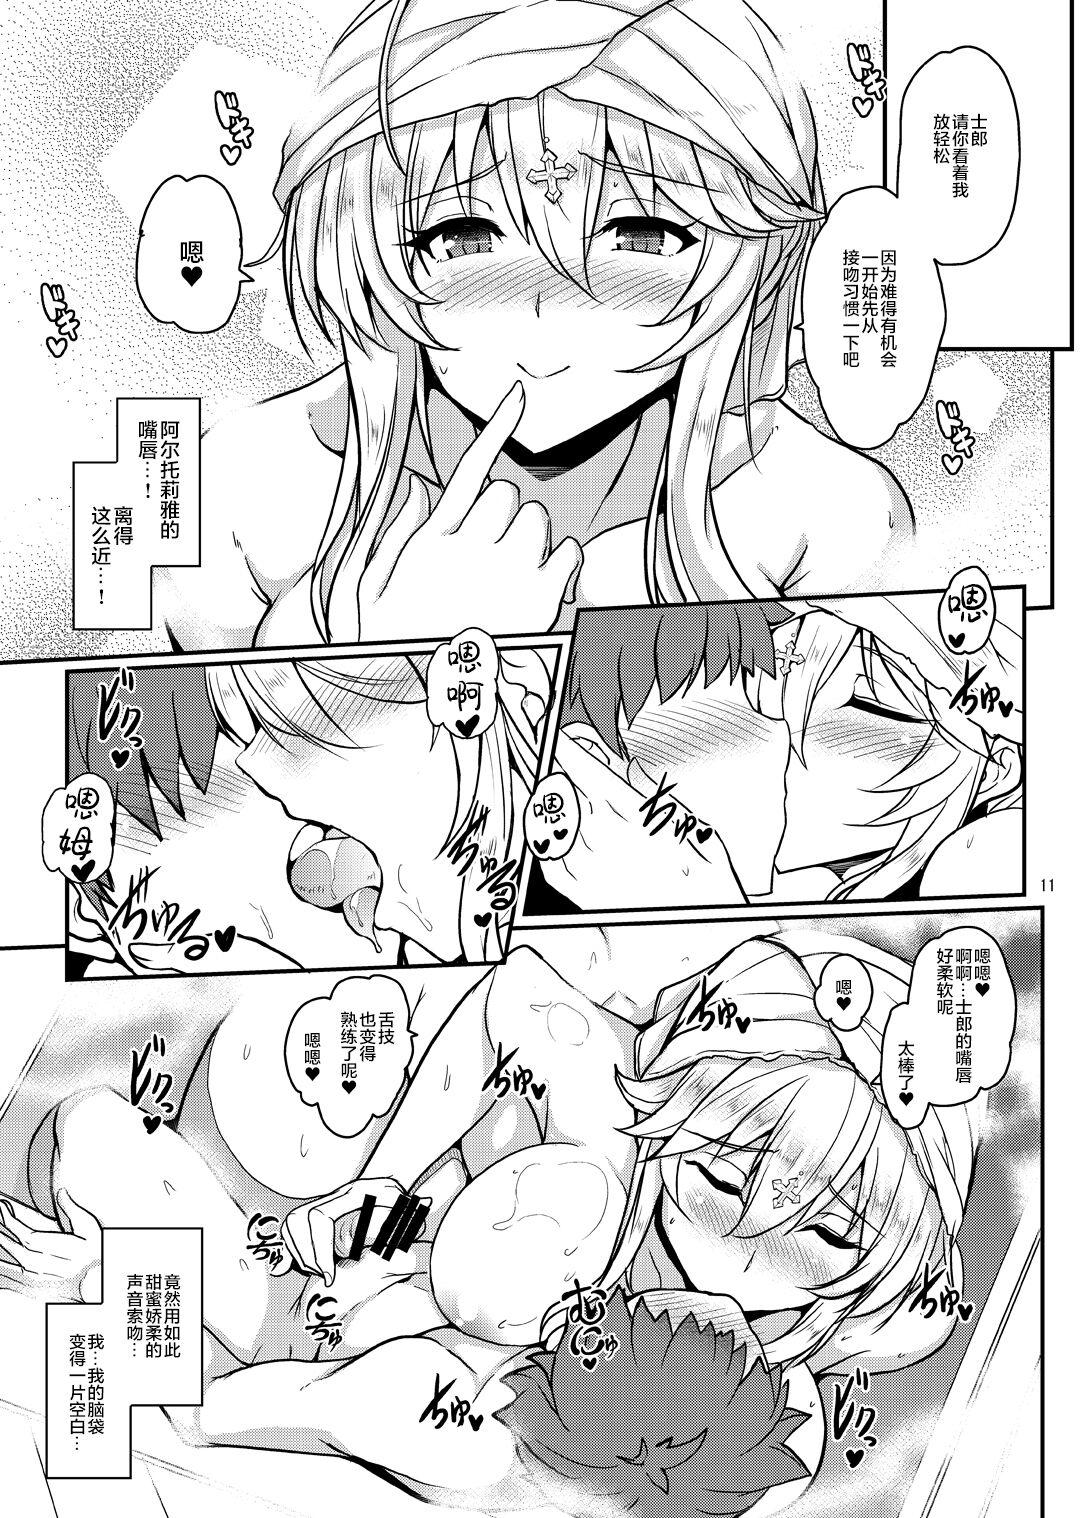 Hot Naked Girl となりの乳王さま六幕 - Fate grand order Colombia - Page 11